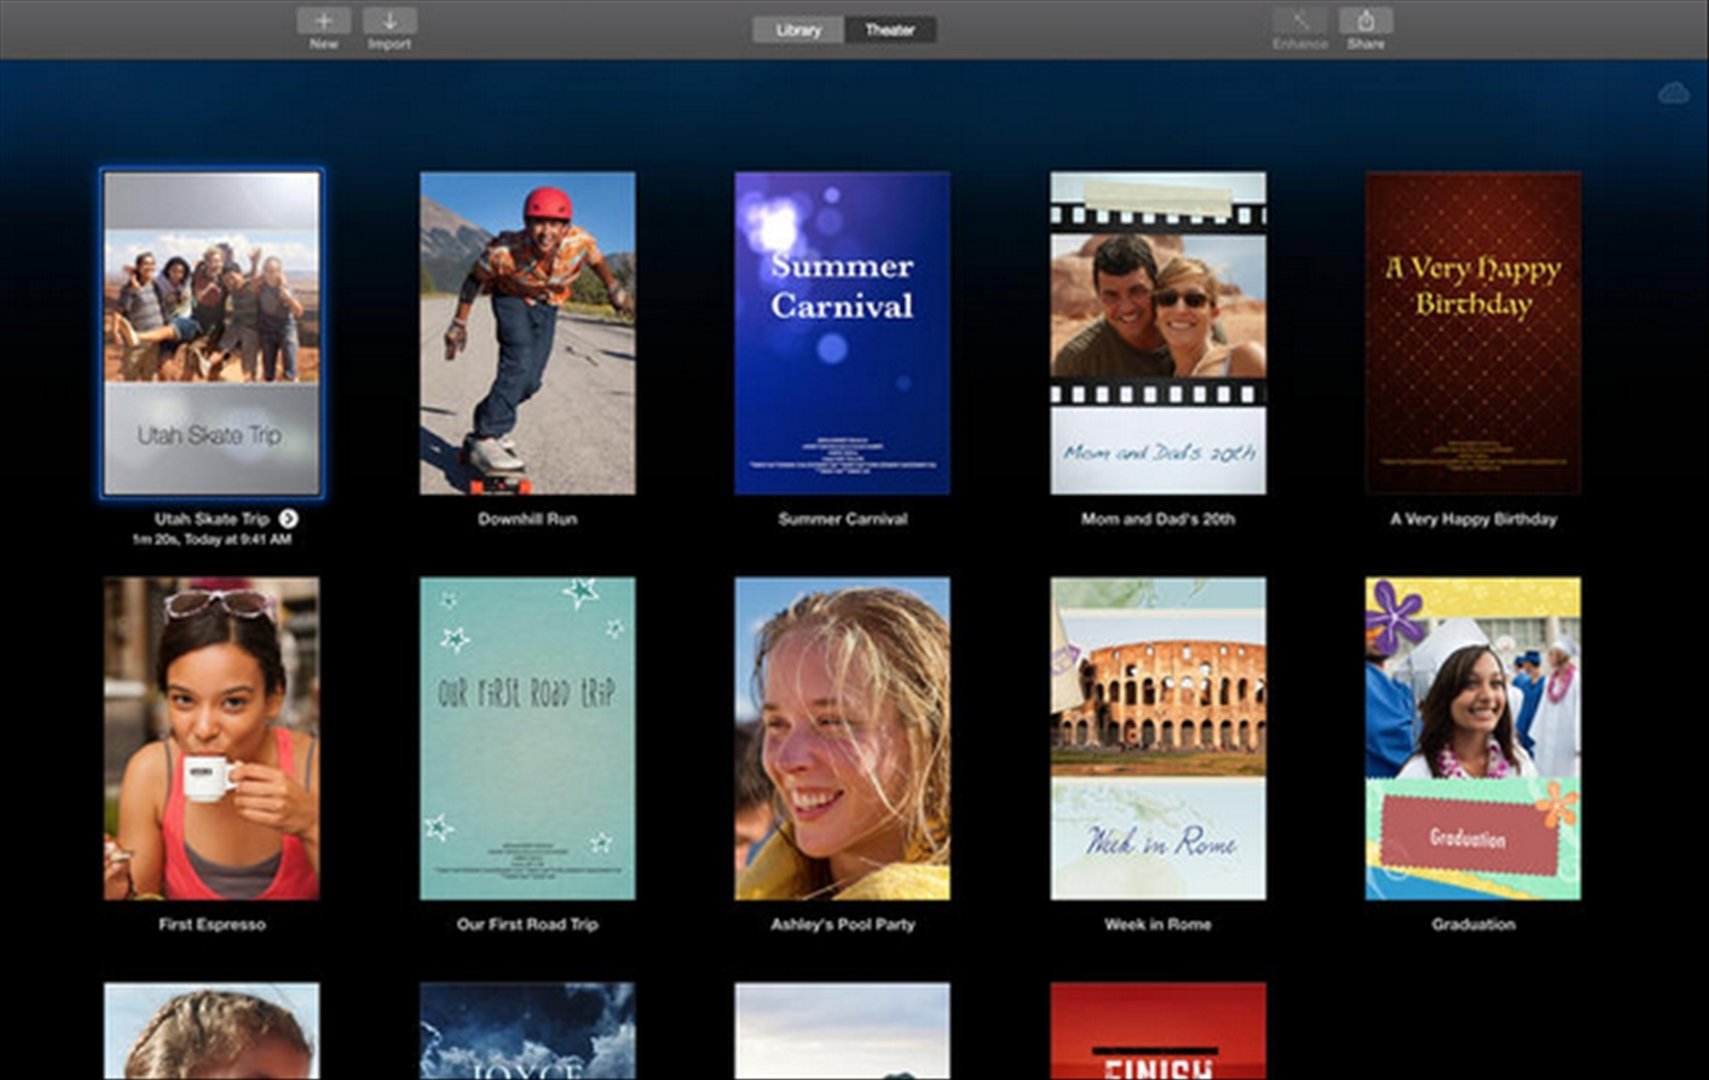 imovie for mac download free